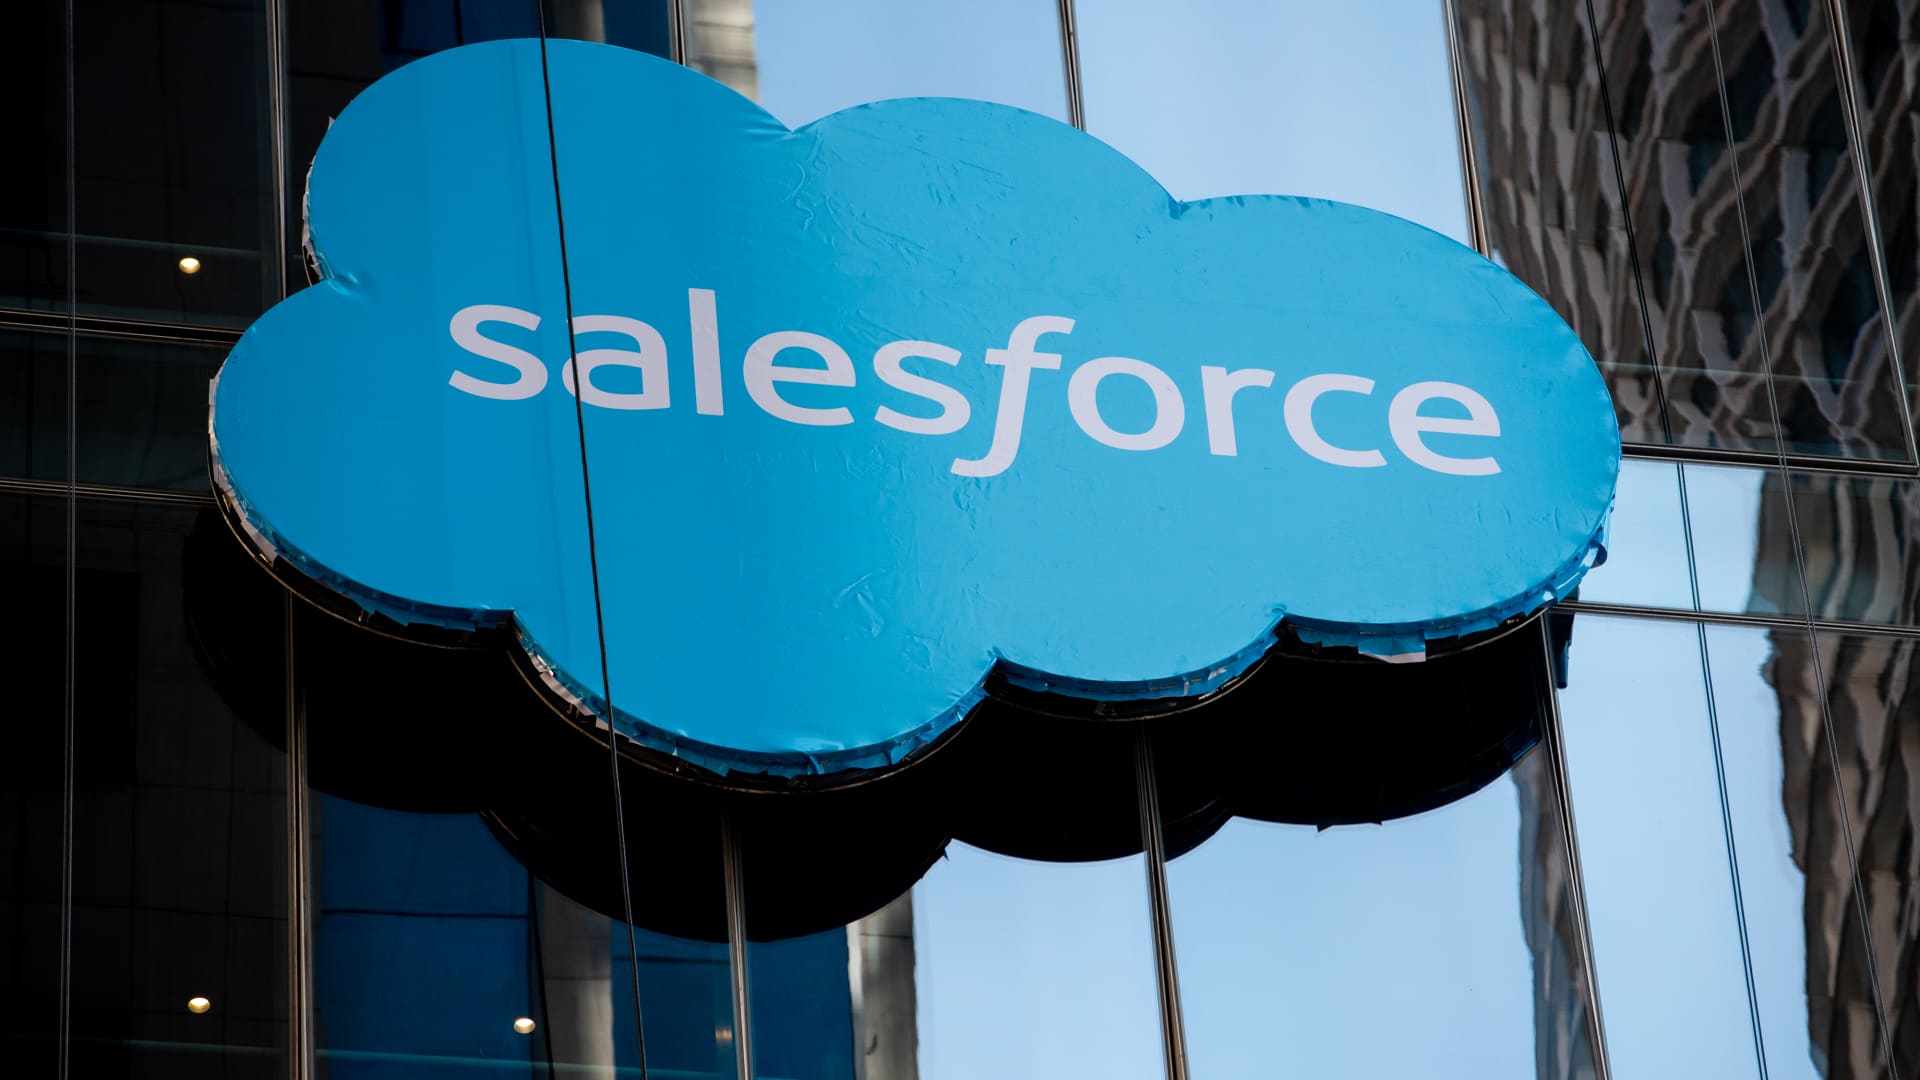 The Salesforce West office building in San Francisco, California, on Wednesday, Jan. 25, 2023.